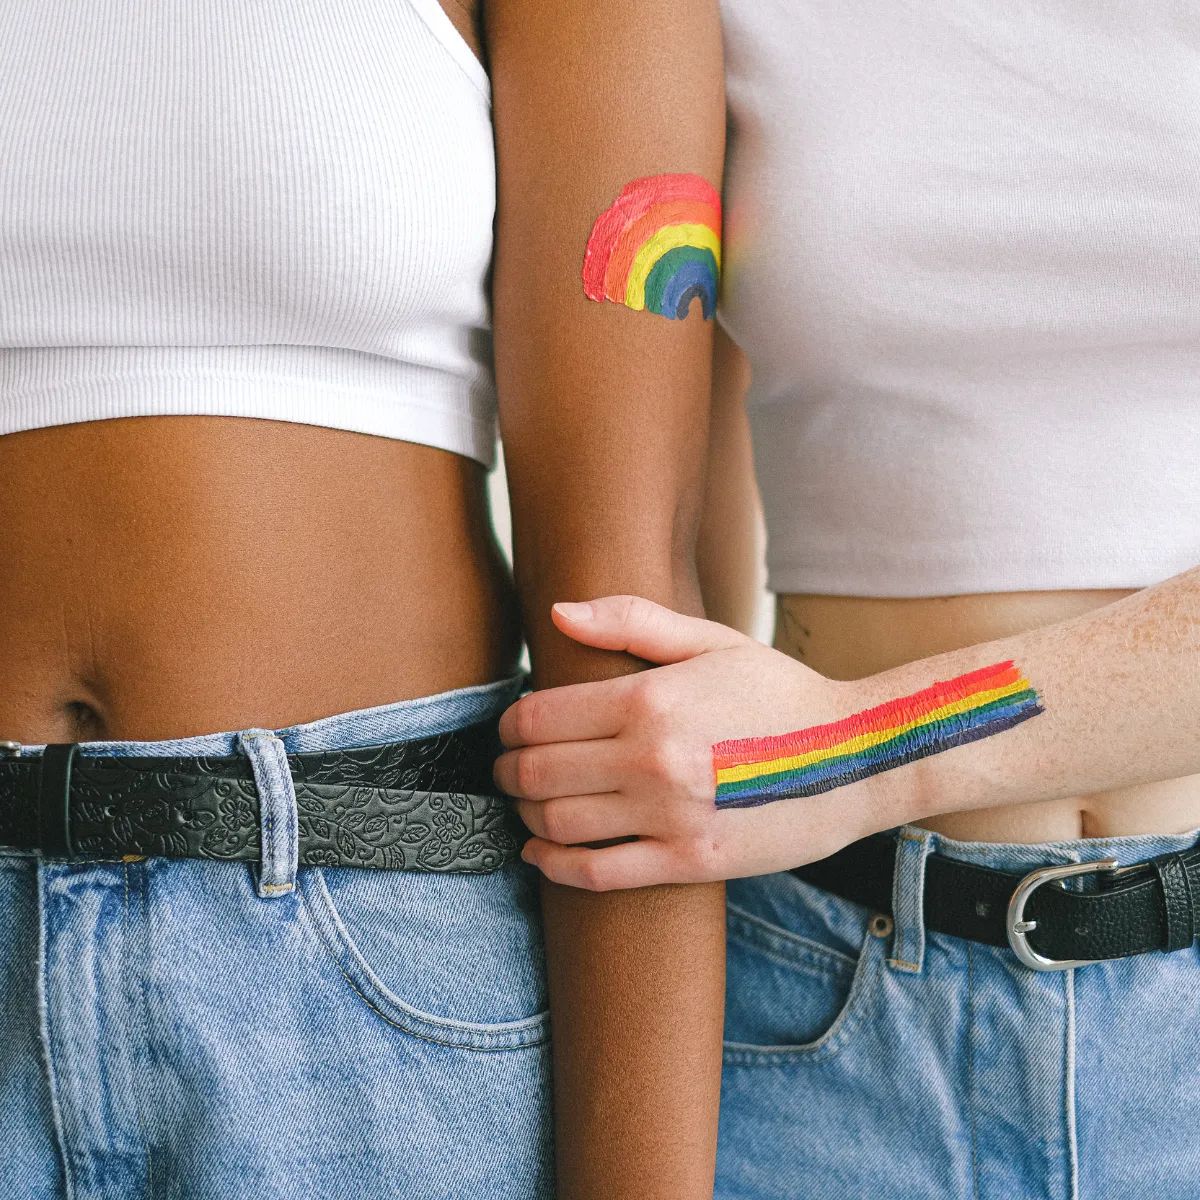 Hello, beautiful souls! 🌟 Today is a day of courage, love, and unity as we celebrate National Coming Out Day. It's a day to honor the incredible journey of self-discovery and authenticity. #NationalComingOutDay #LoveIsLove #CelebrateAuthenticity #EmbraceYourTruth #StandWithPride